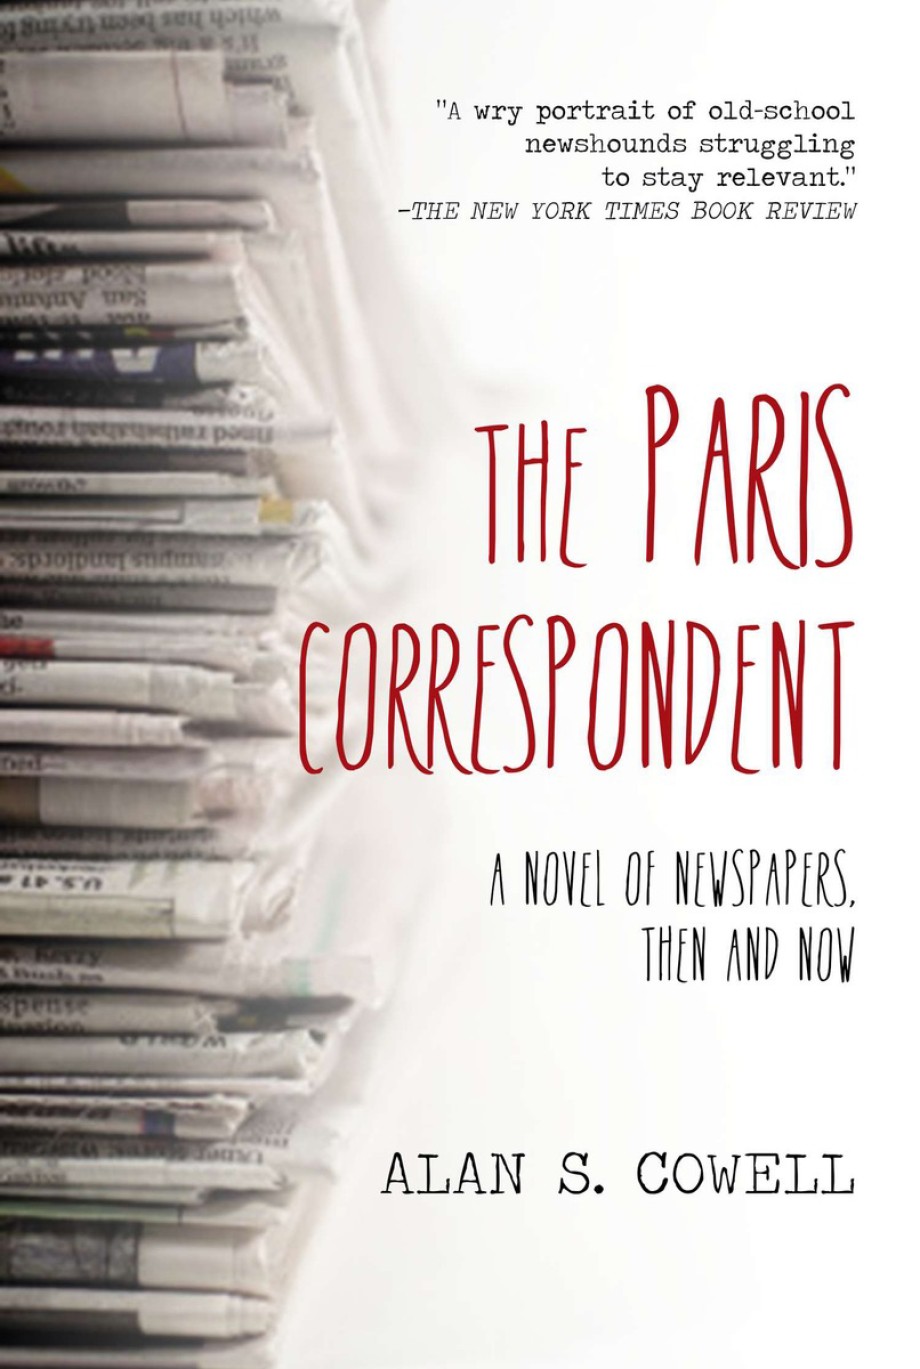 Paris Correspondent A Novel of Newspapers, Then and Now